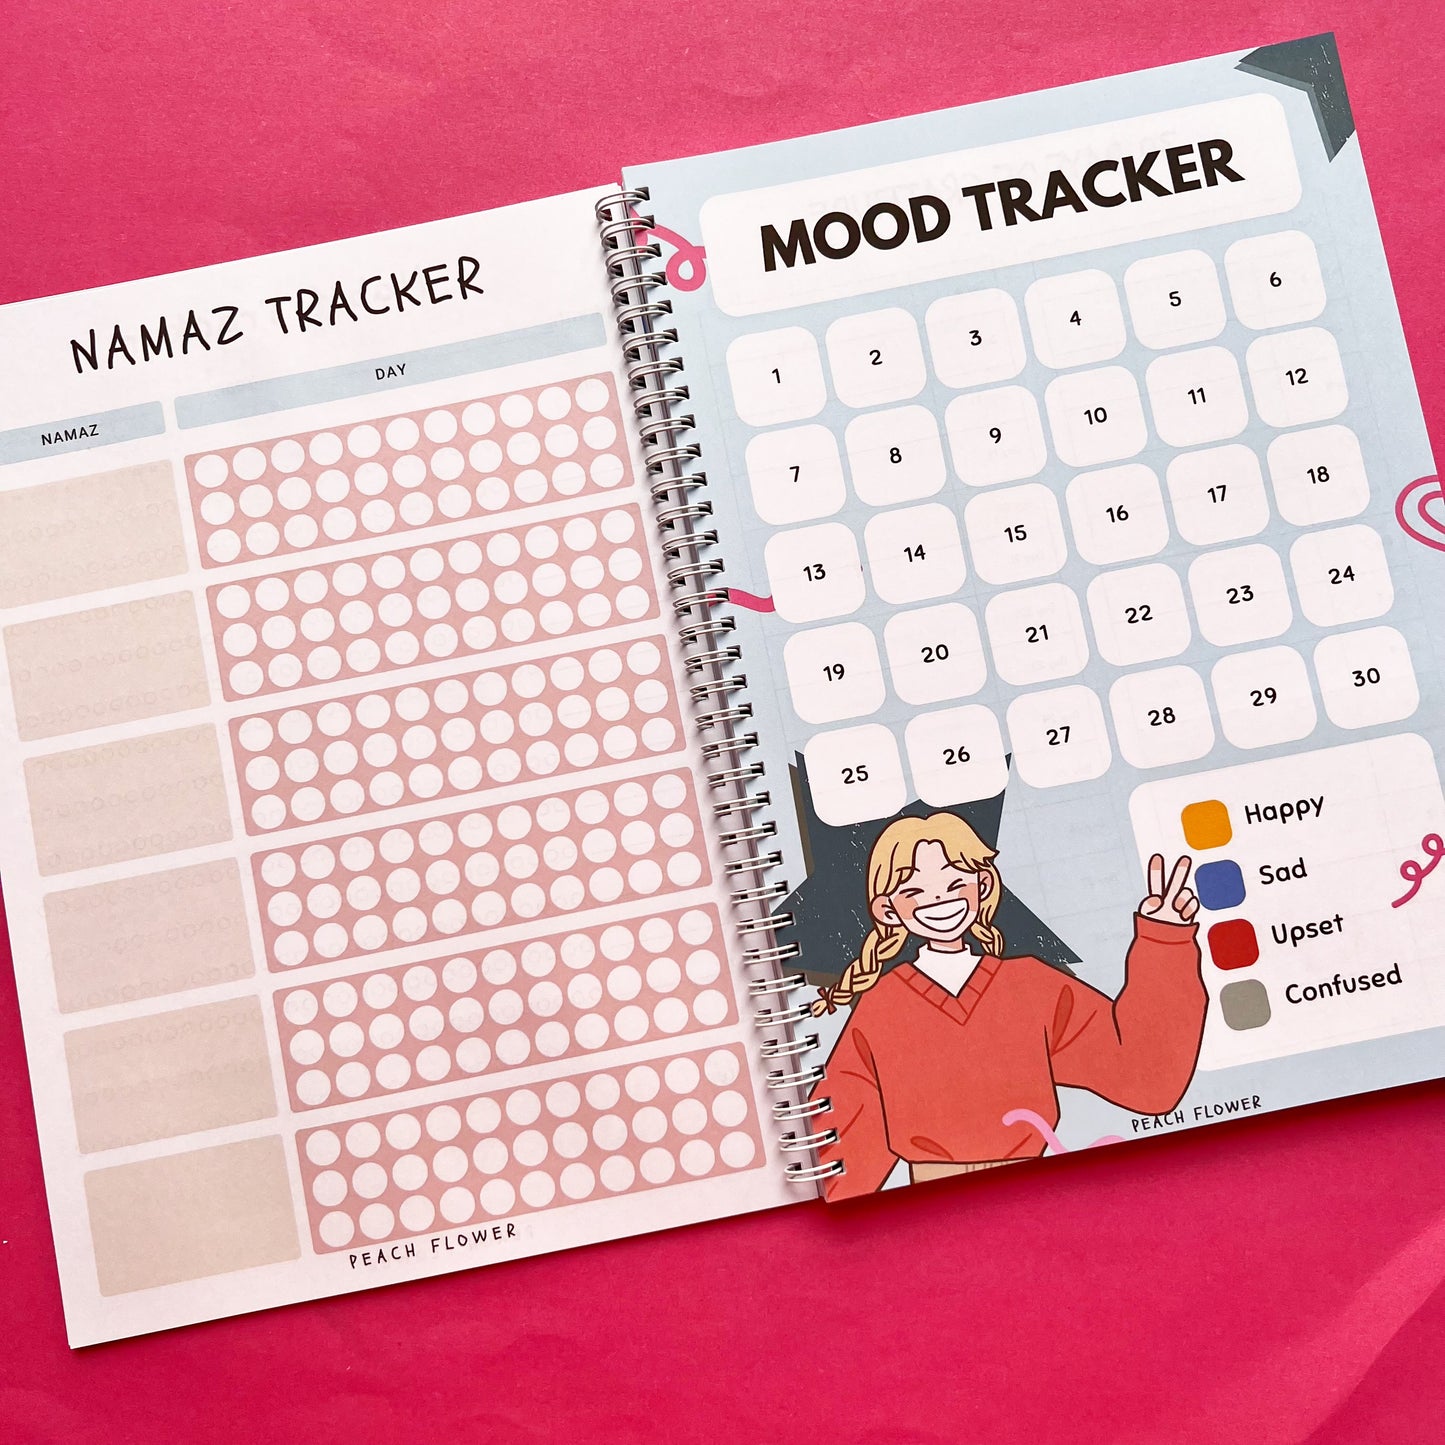 Yearly Planner 2024 (Free: 2 Sticker Sheets + 4 Bookmarks + 6 Cards)